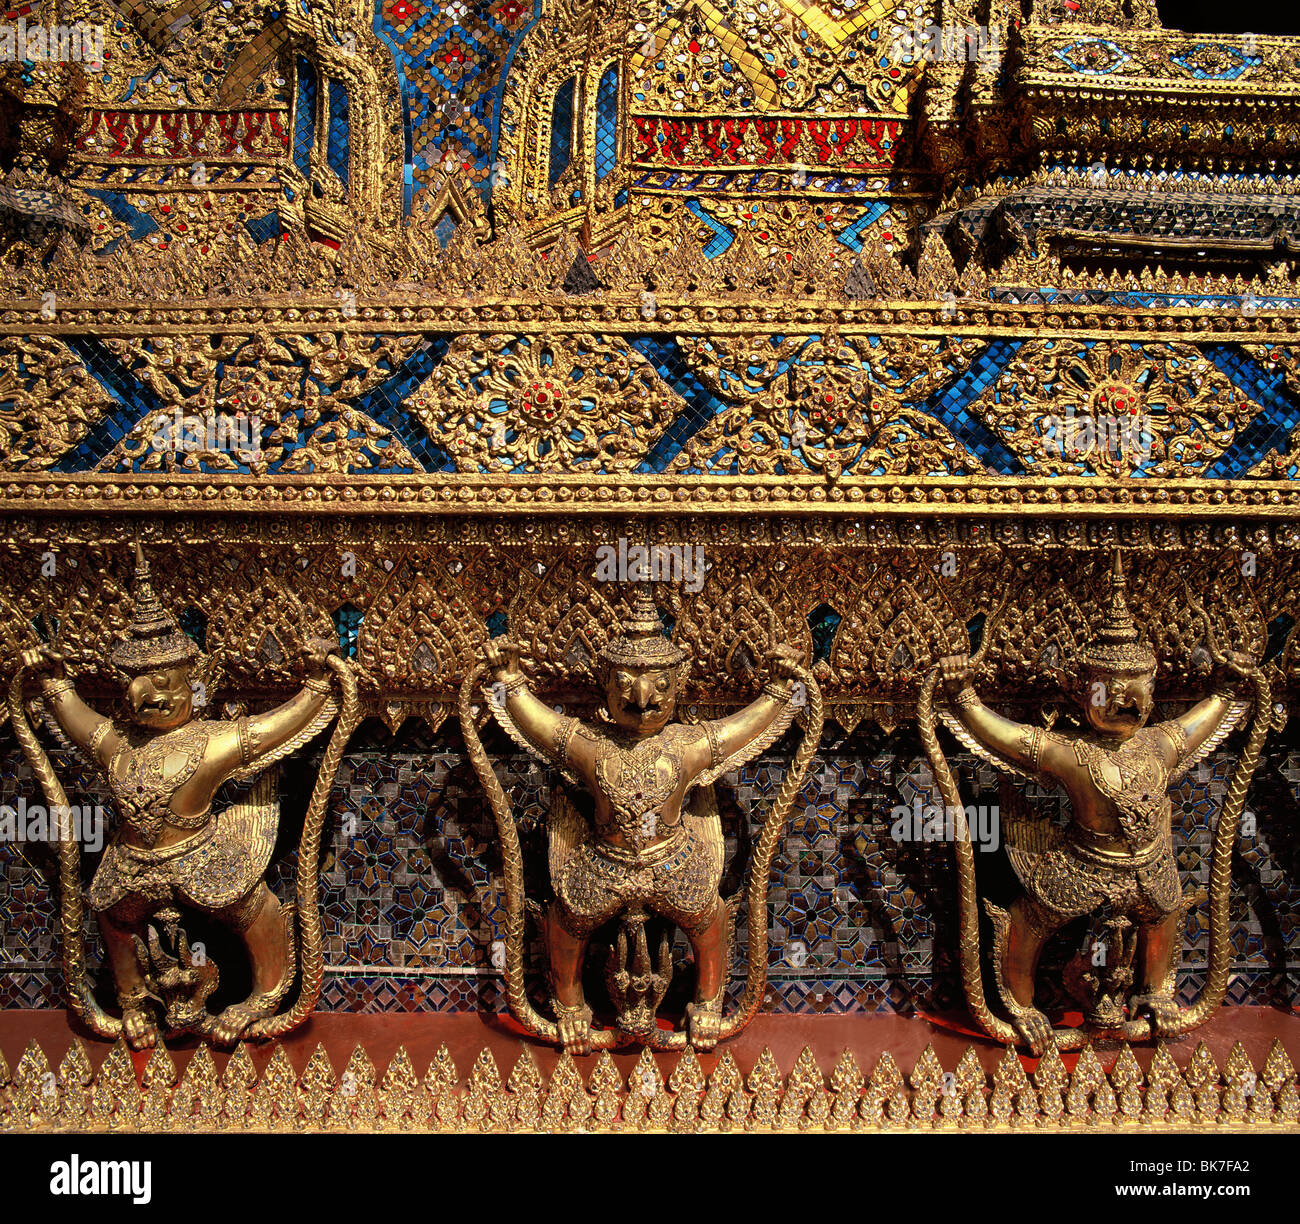 Garuda decorations on the side of the porch of the Temple of Emerald Buddha, Royal Palace, Bangkok, Thailand Stock Photo